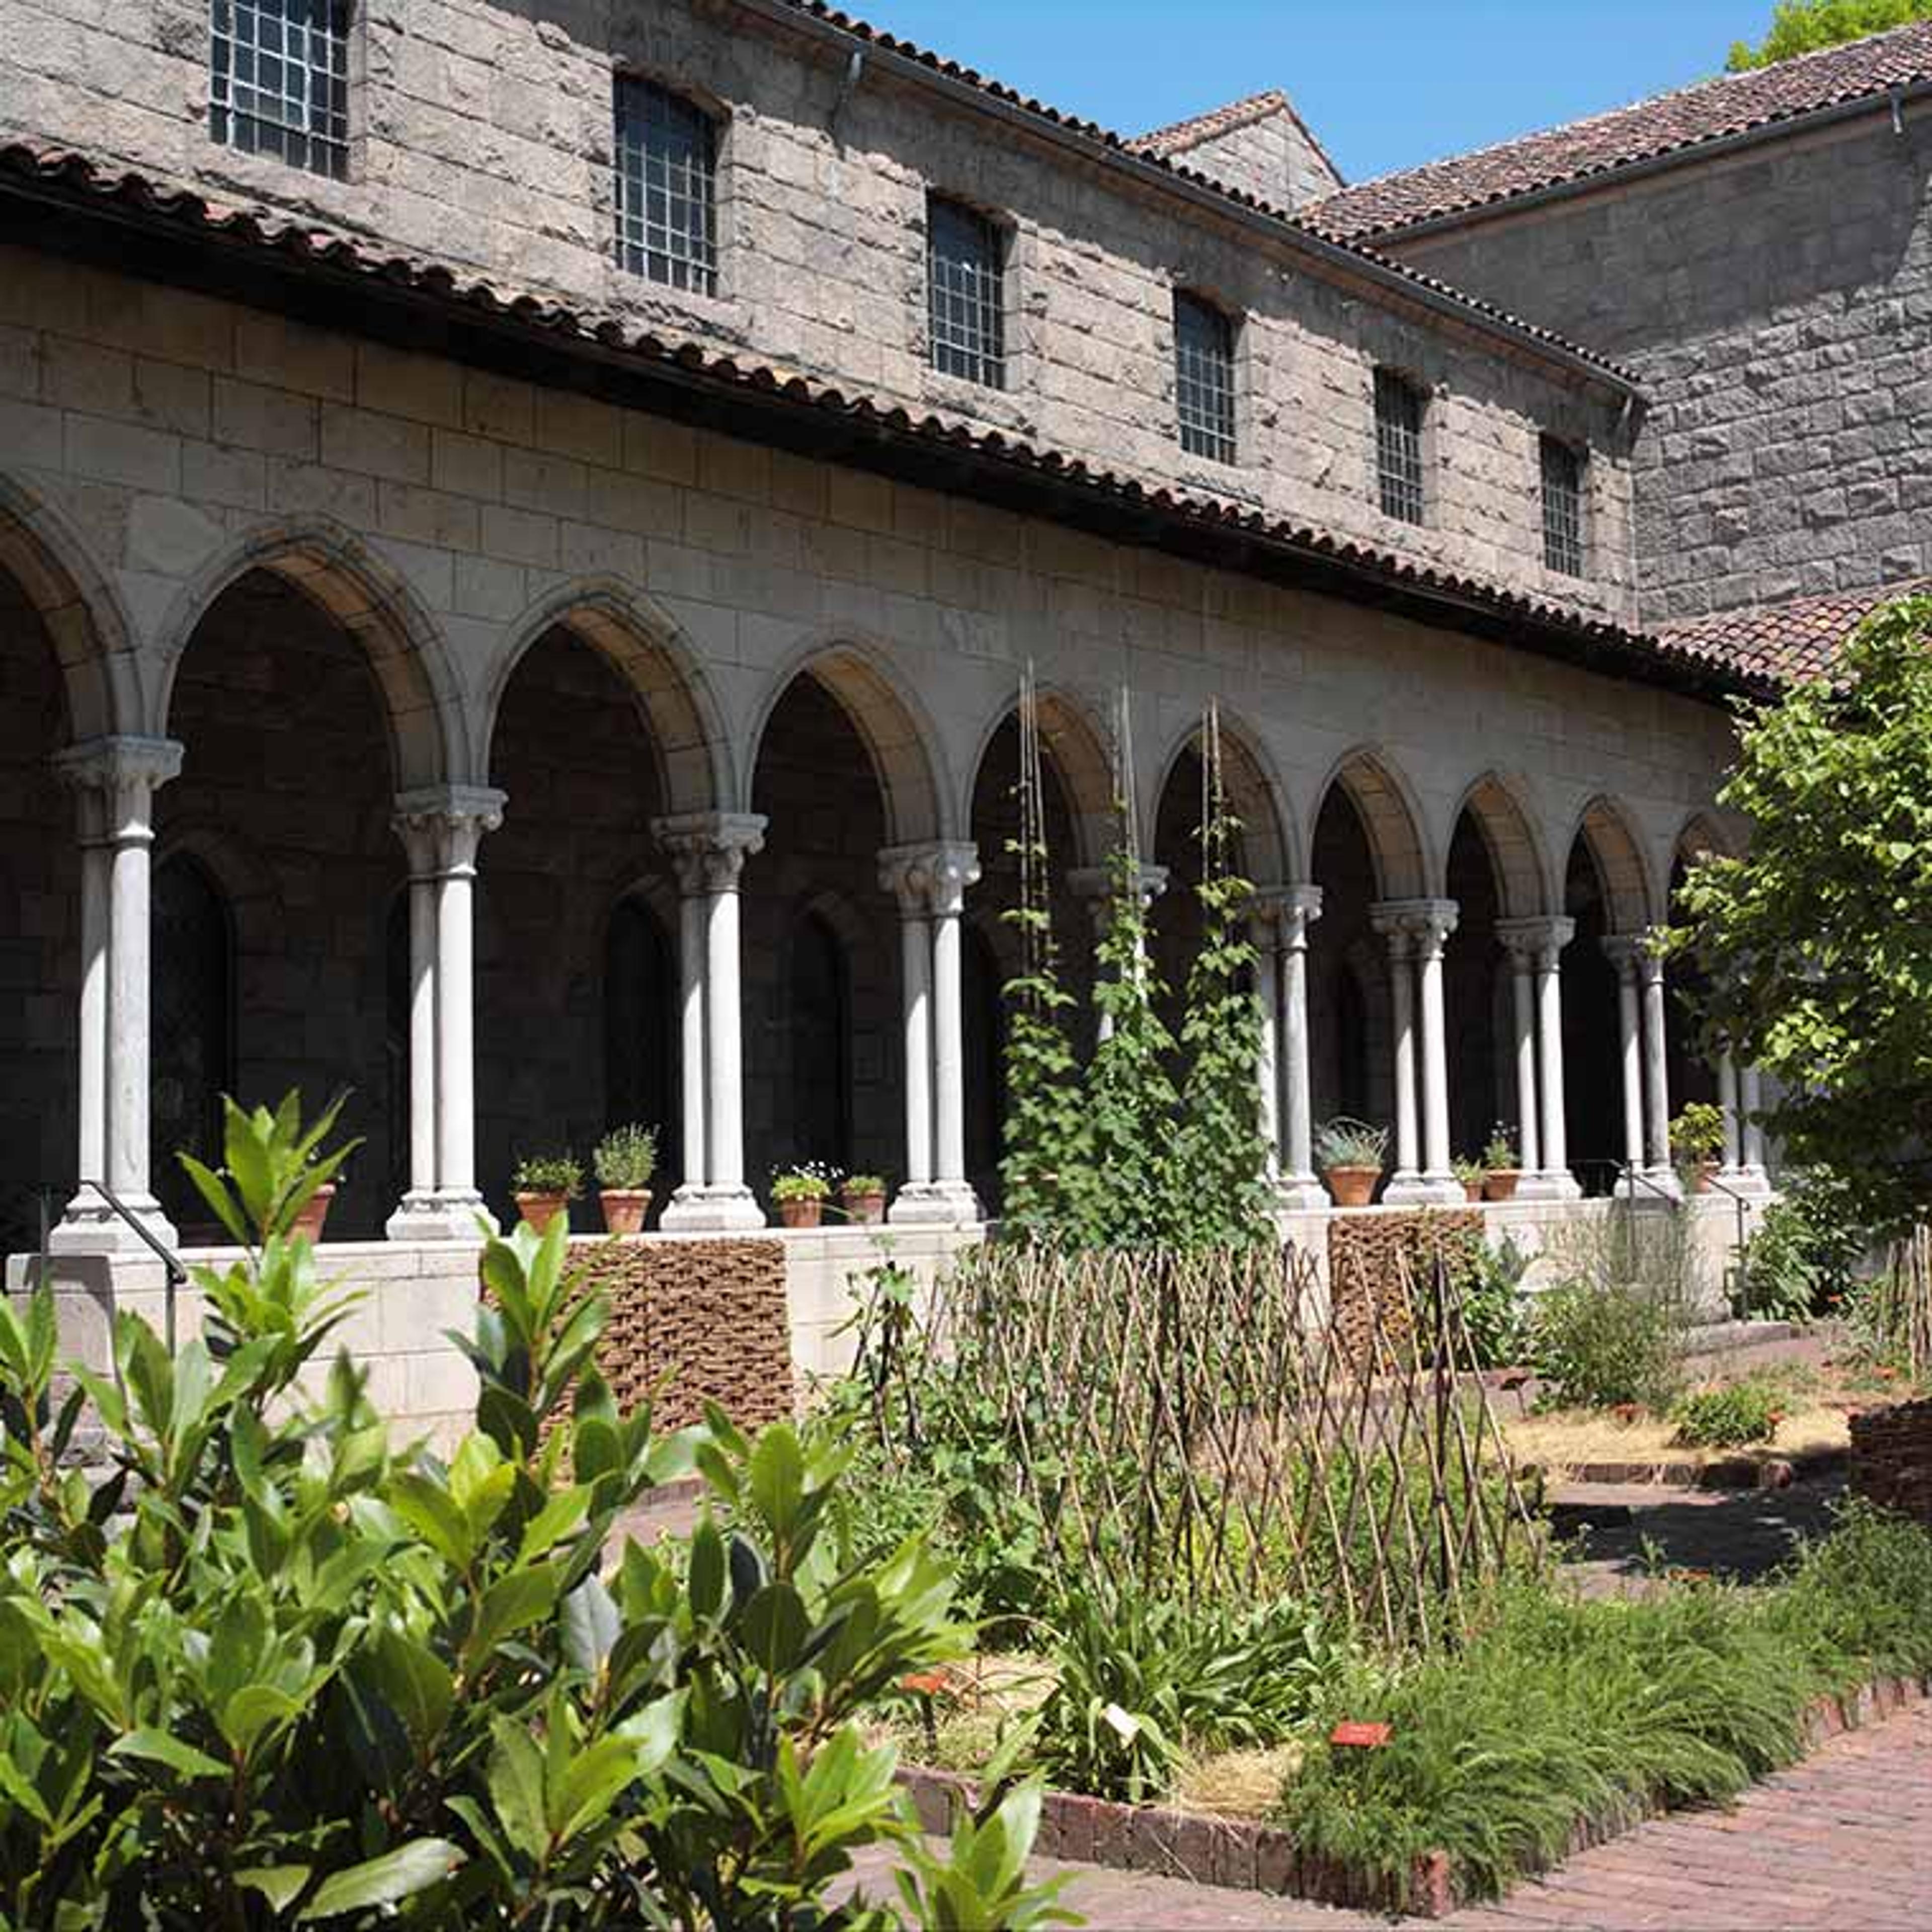 The cloister's L-shaped arcade screens the herb garden, which is modeled after medieval times.